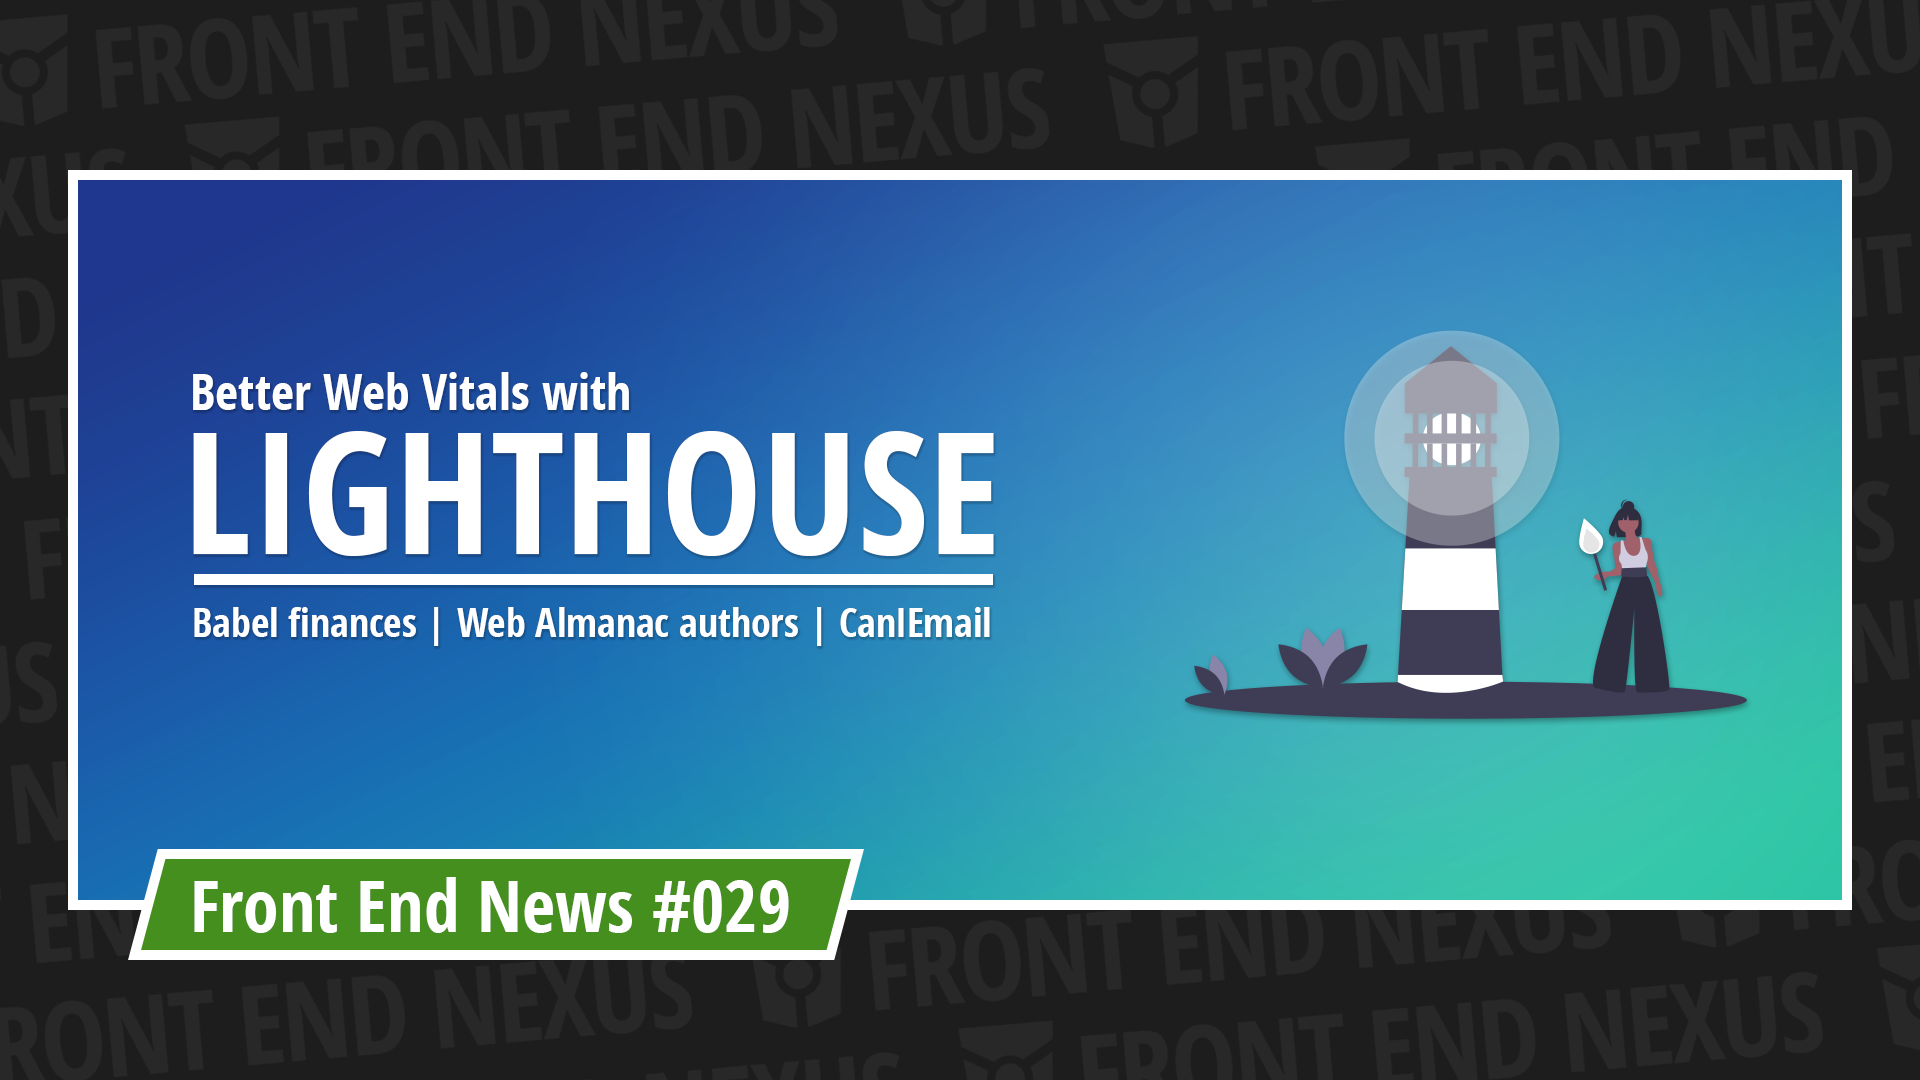 Better Web Vitals with Lighthouse, why is Babel running out of money, Web Almanac needs authors, and presenting CanIEmail | Front End News #029